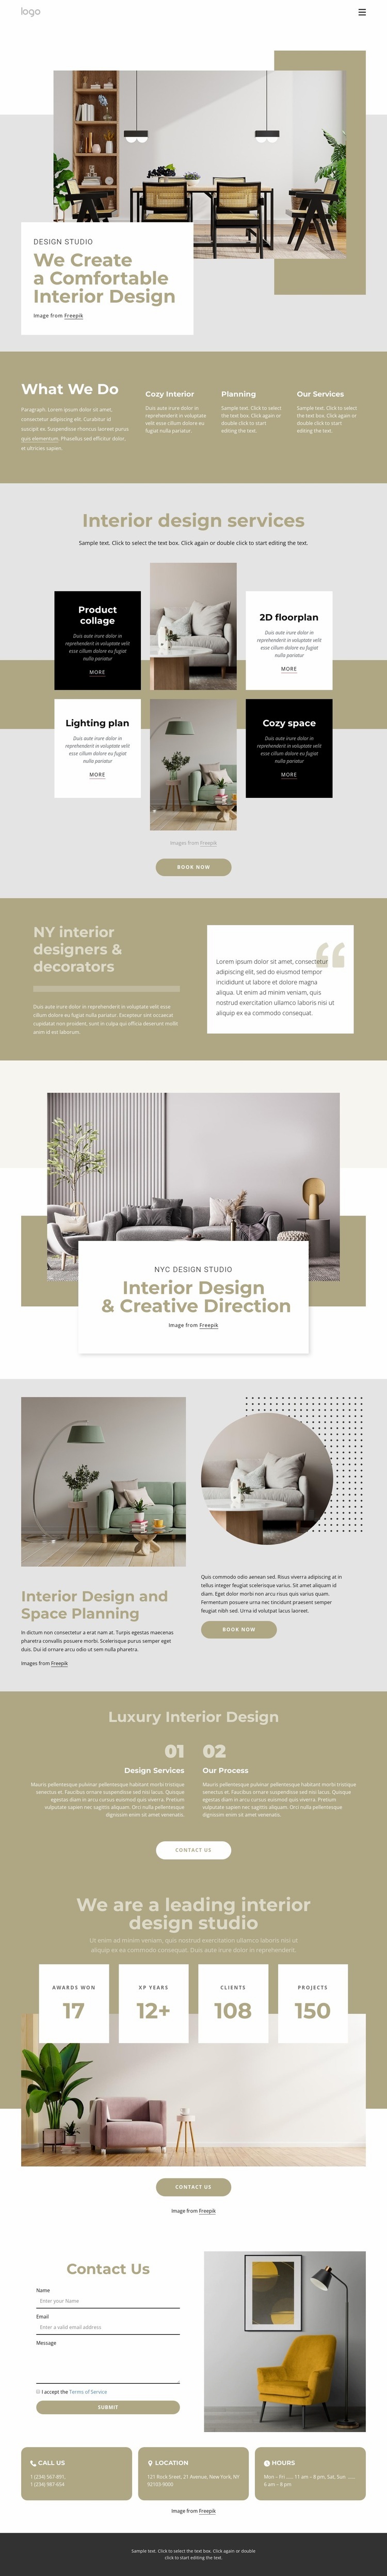 We create a comfortable interiors Homepage Design